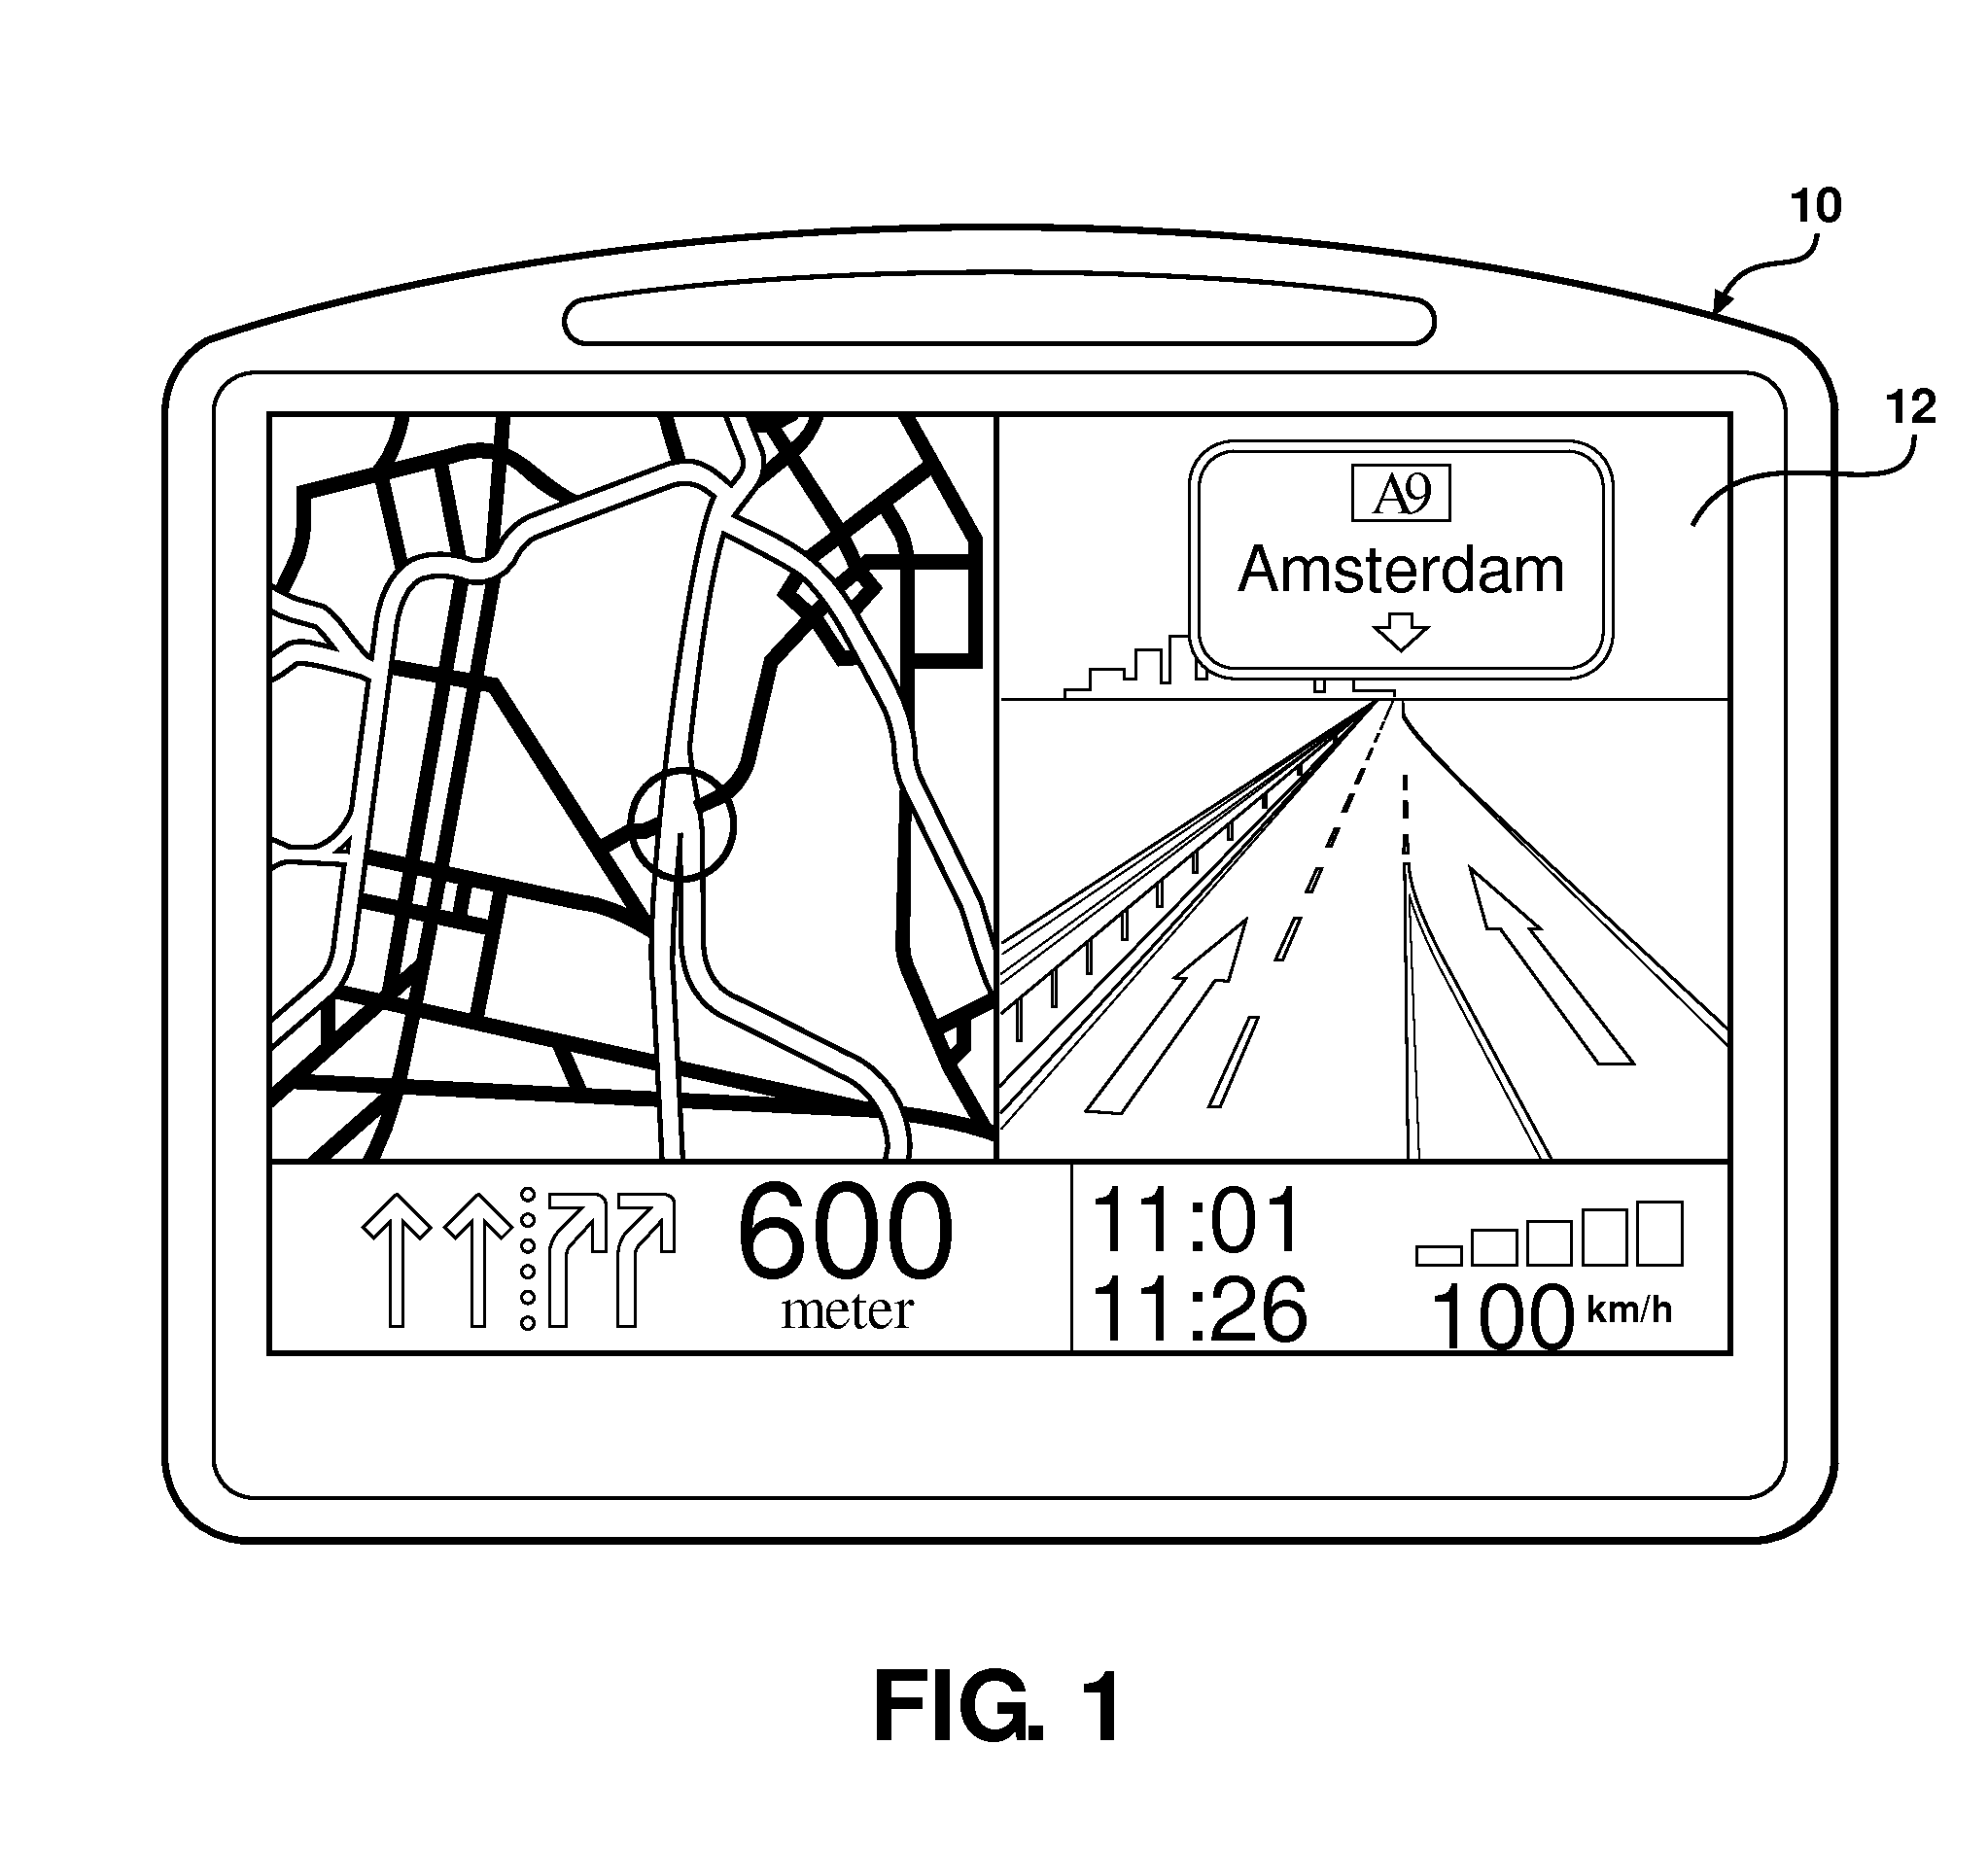 Method for computing an energy efficient route